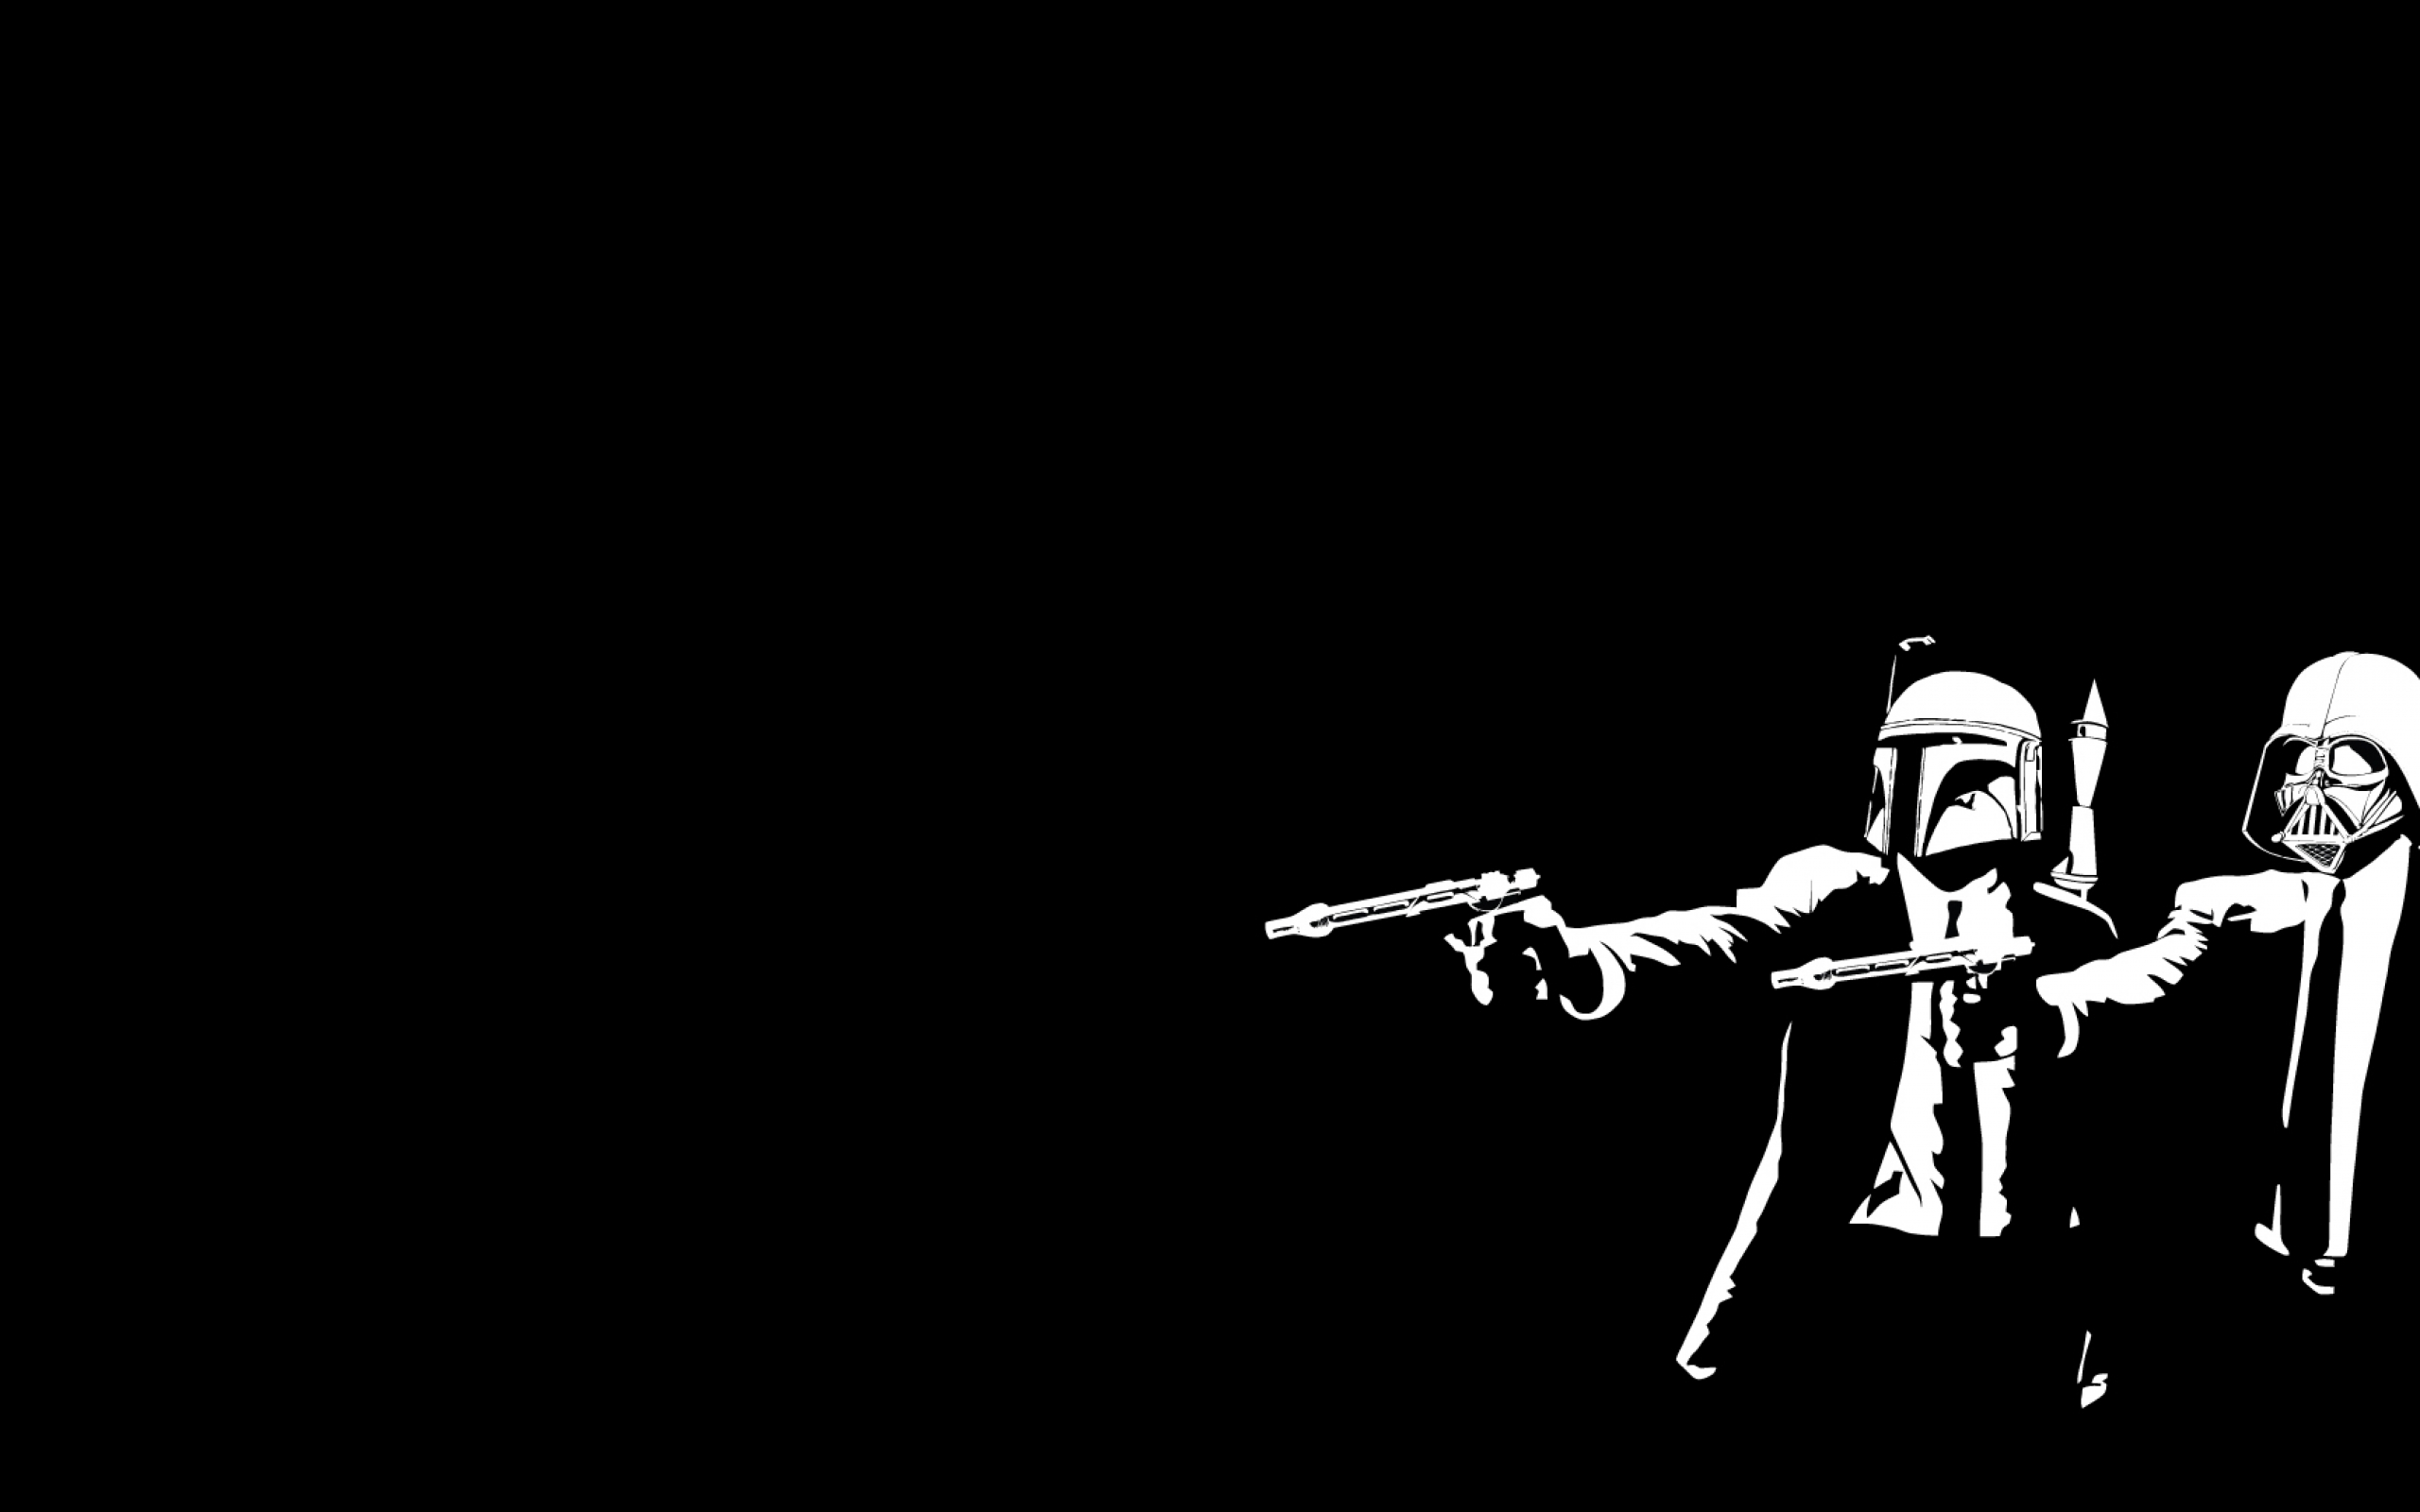 Star Wars Pulp Fiction Crossovers Black Background Wallpaper